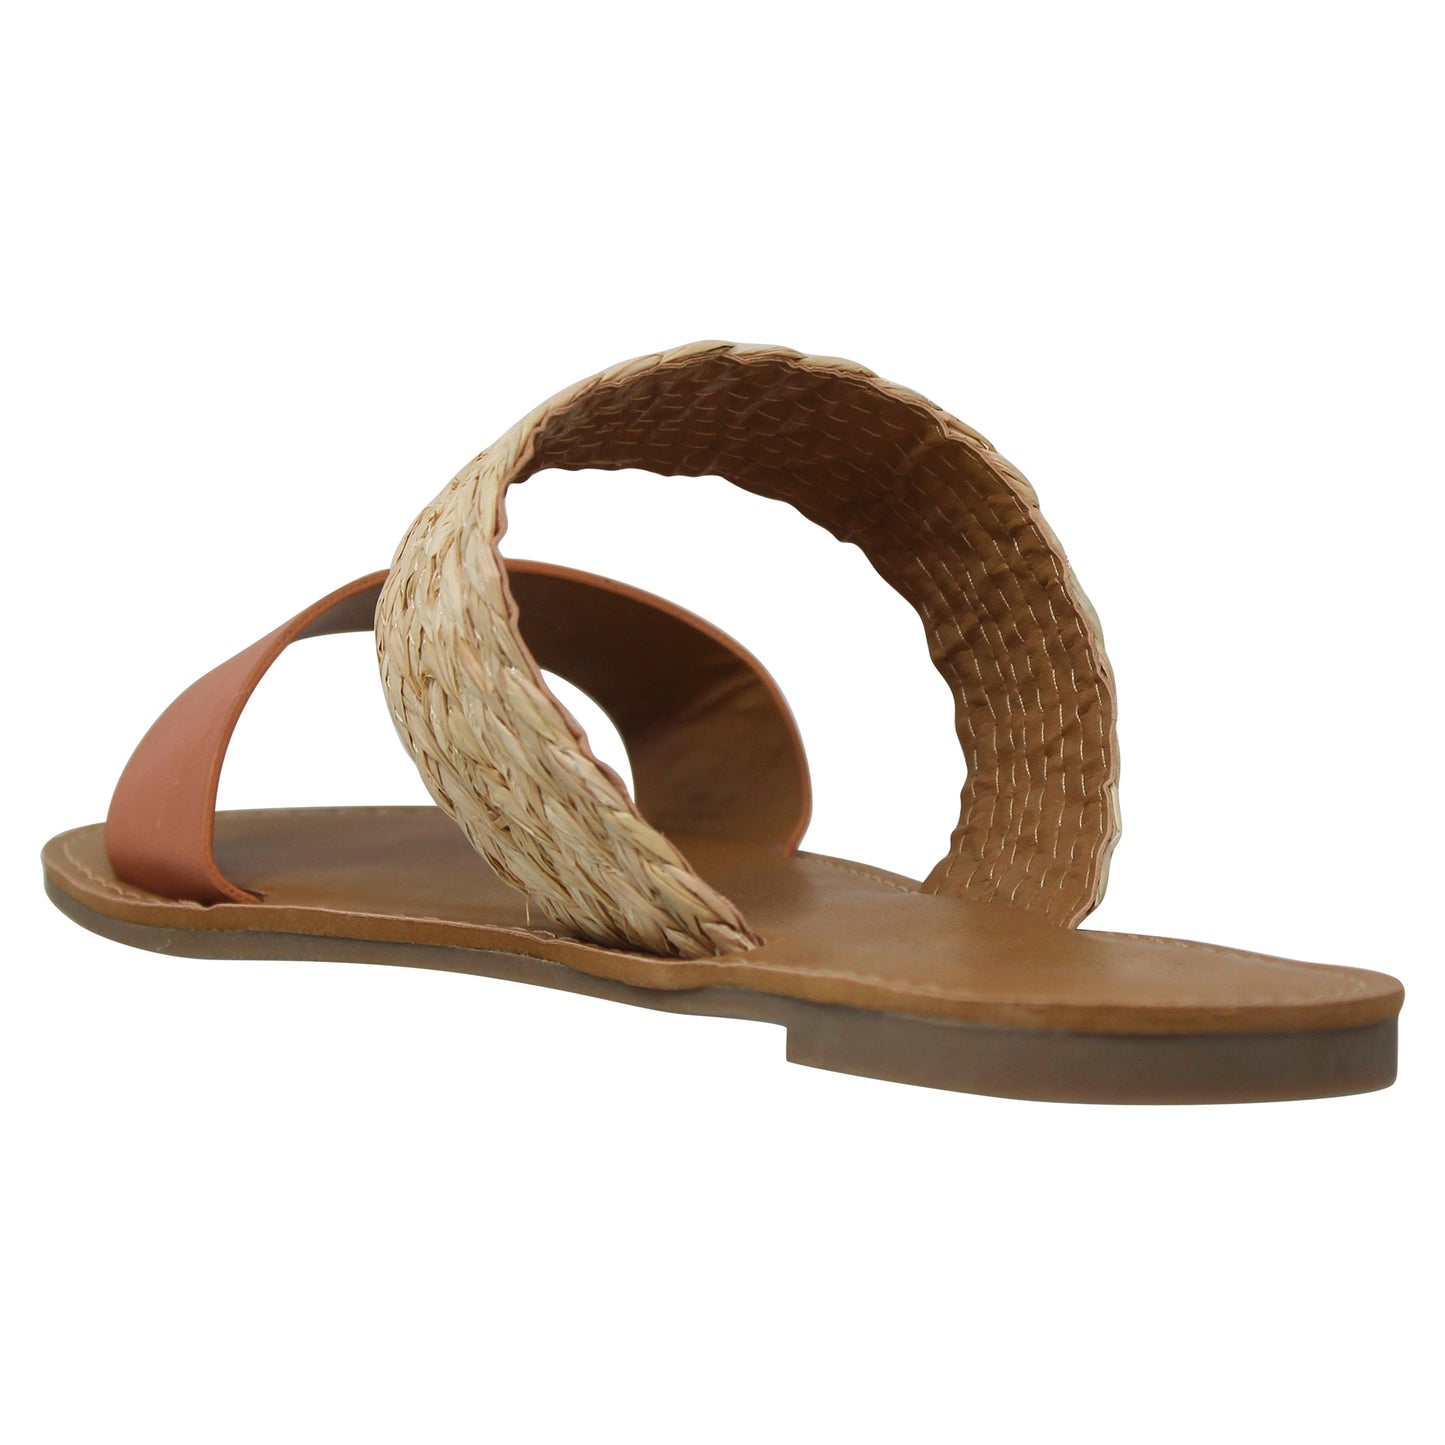 Women's Summer Sandals Two Band Slip On Flats Coral/Straw Tan